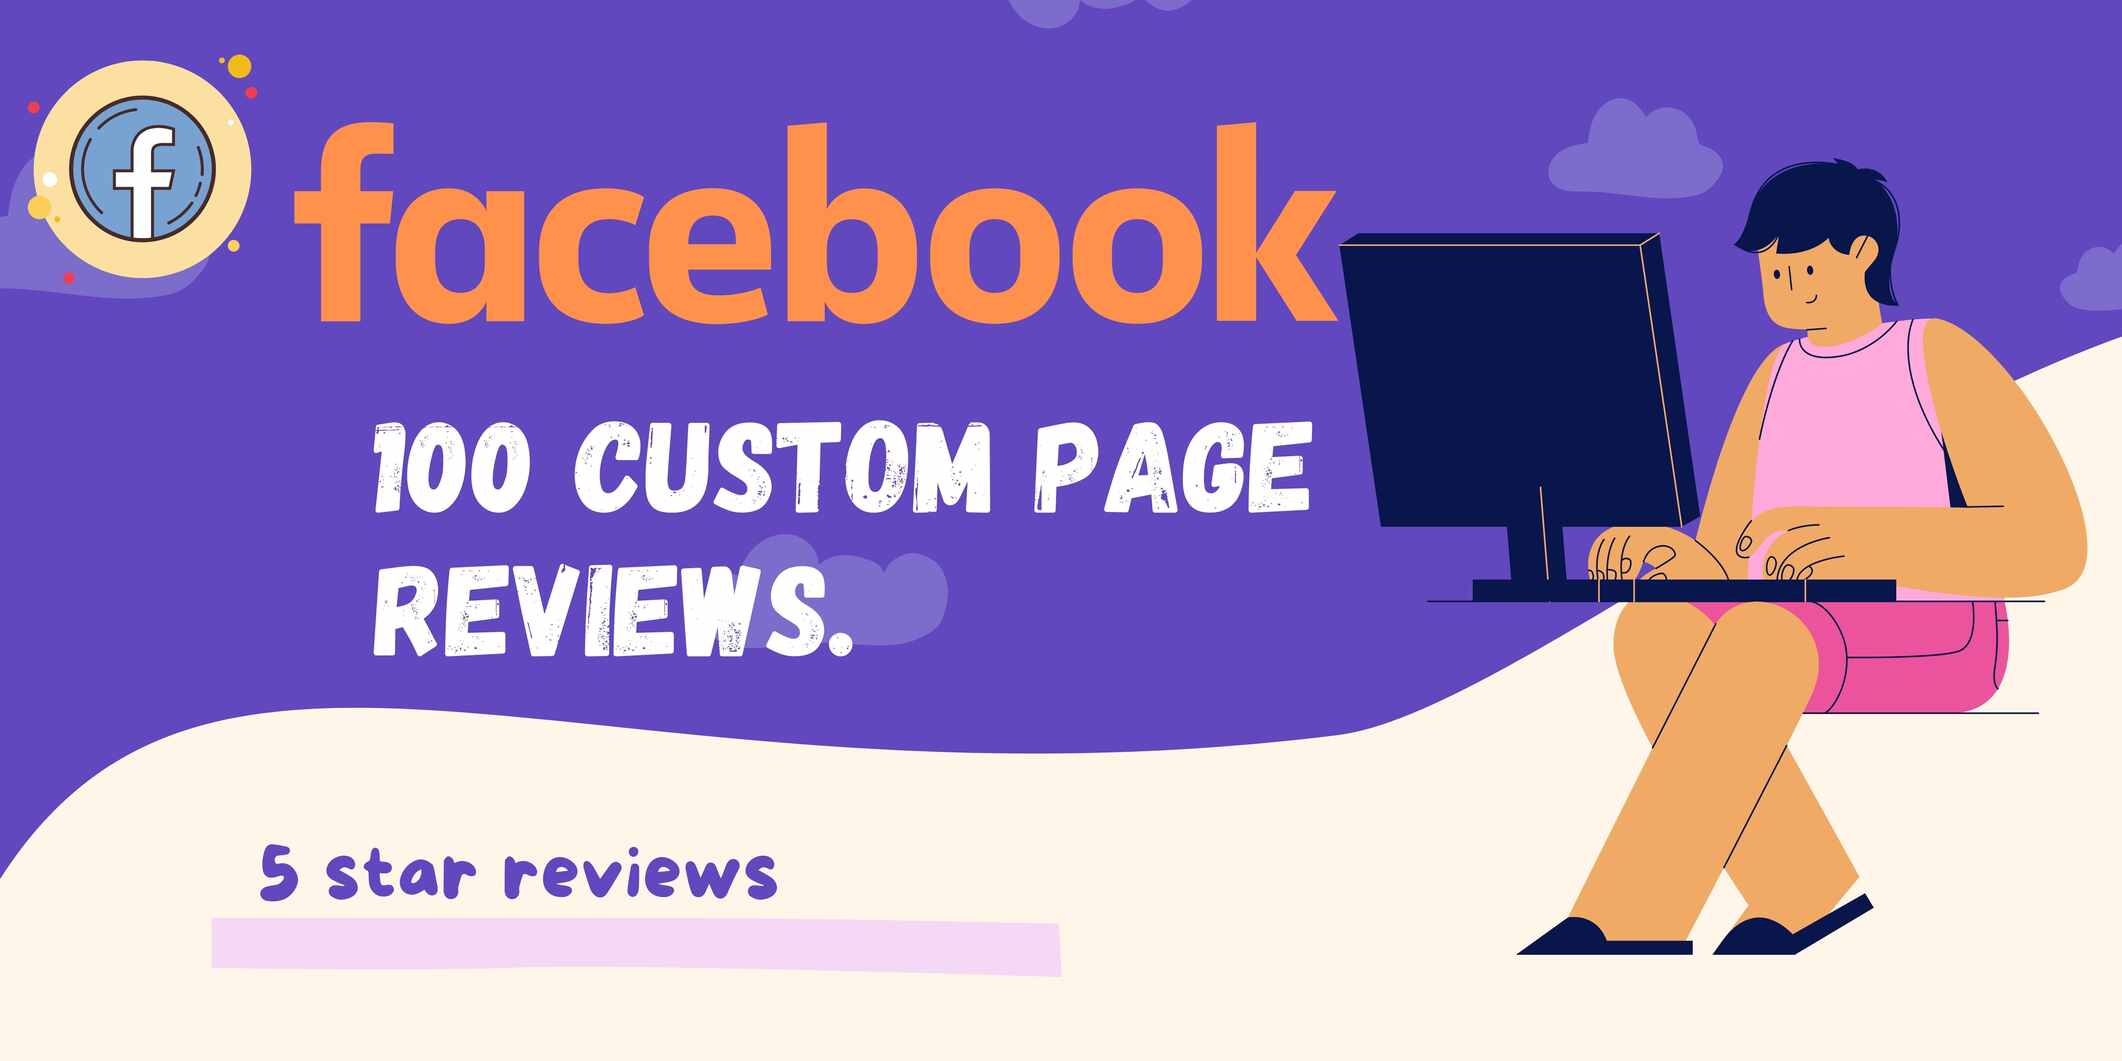 You will get 100 Facebook Page Review Lifetime guaranteed & Active user